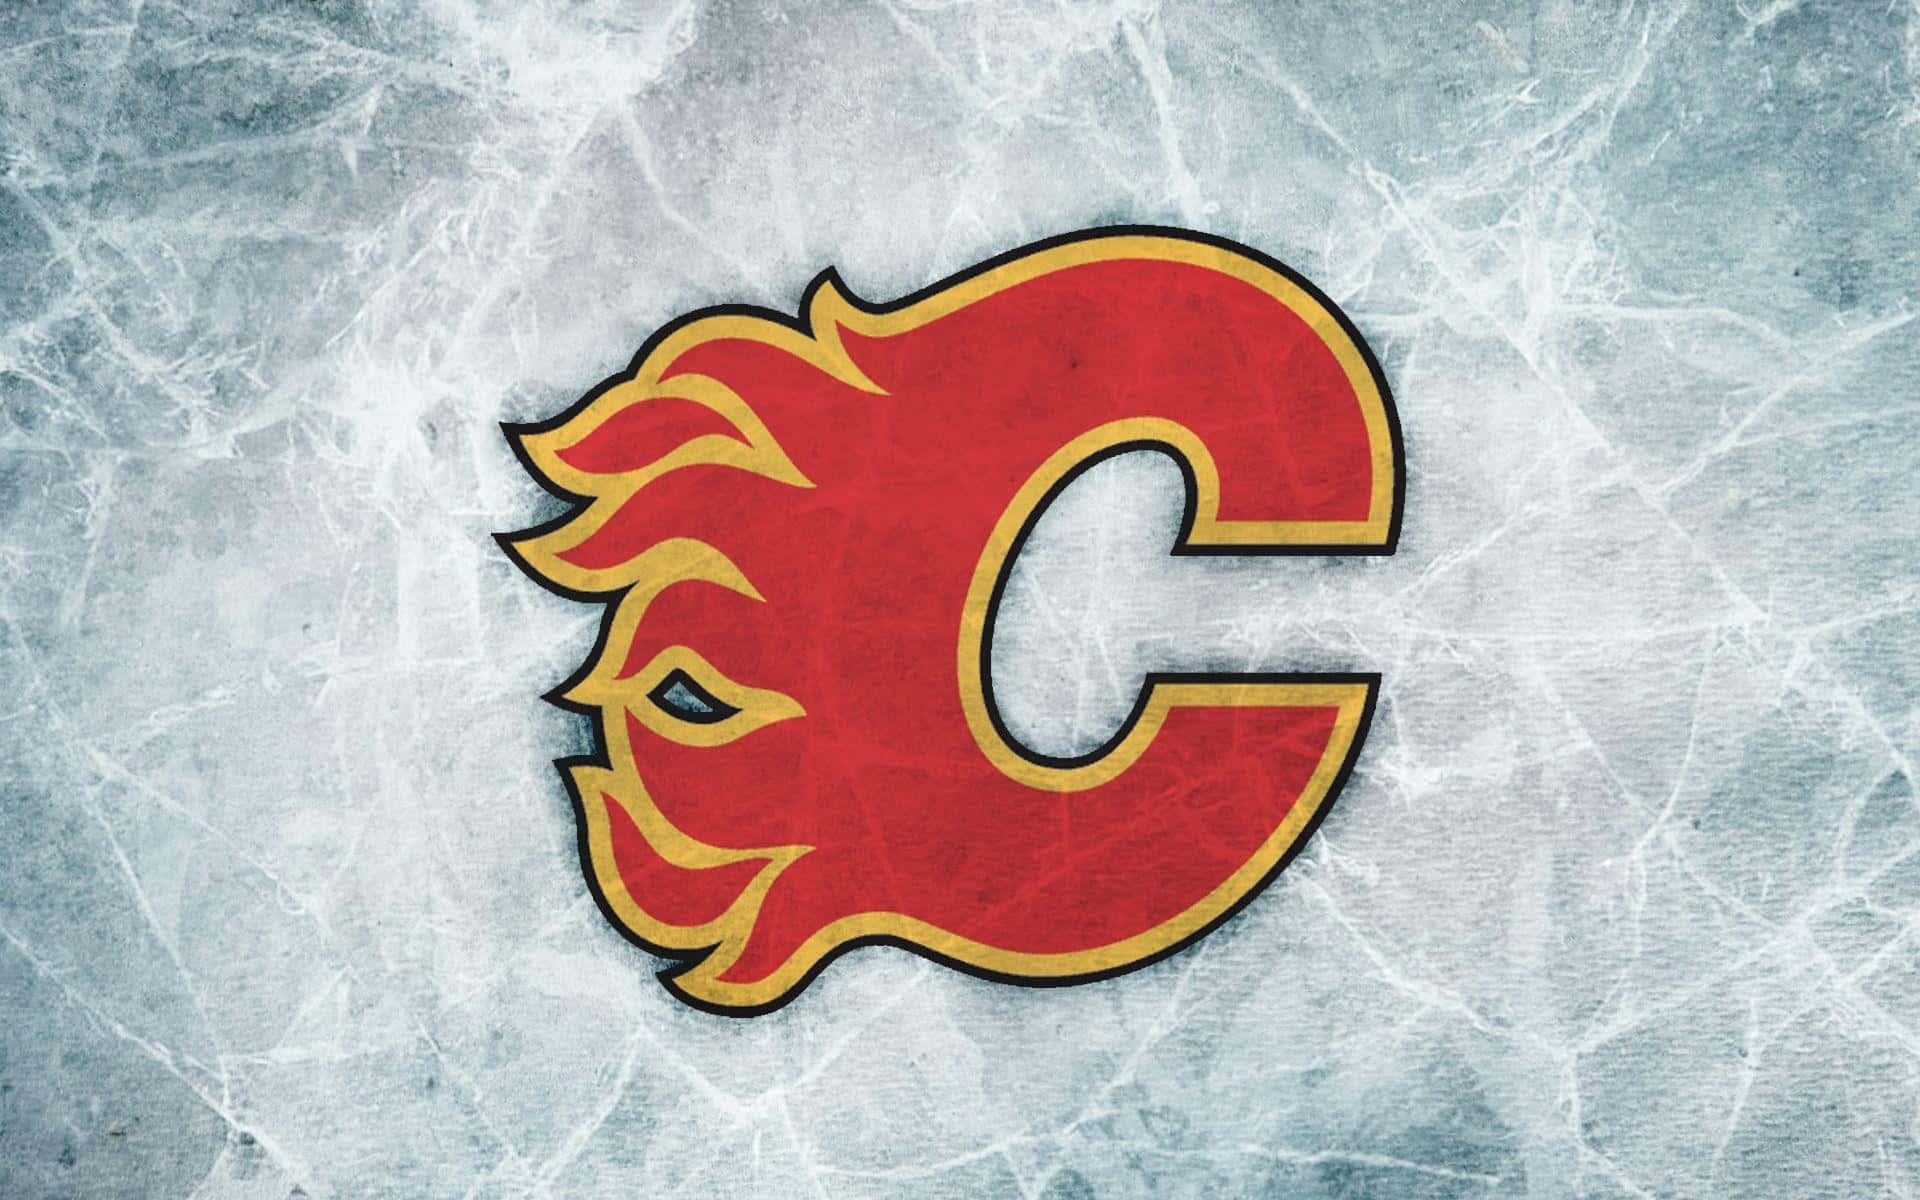 A Logo Of The Calgary Flames On Ice